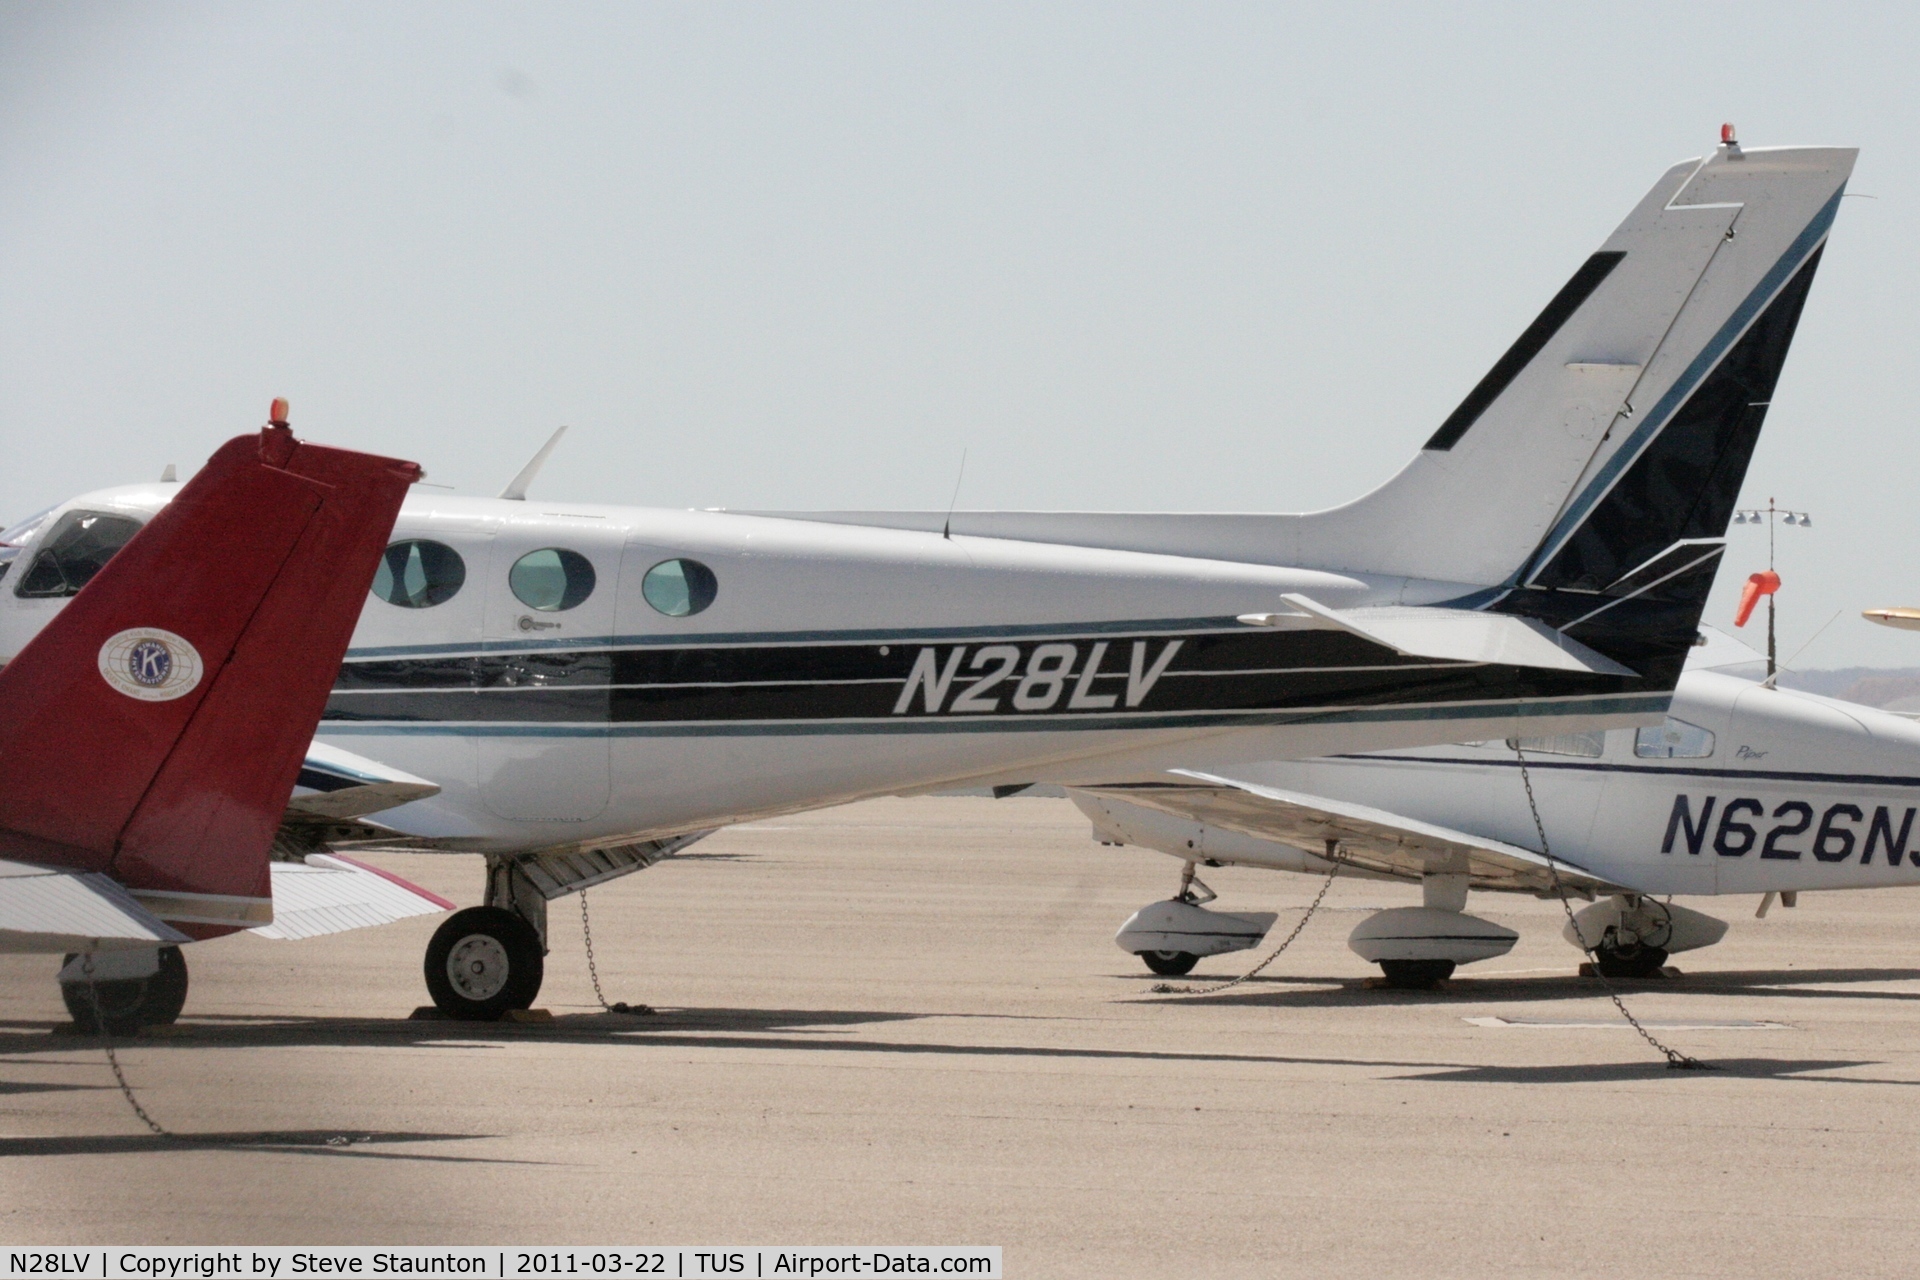 N28LV, 1979 Cessna 340A C/N 340A0754, Taken at Tucson International Airport, in March 2011 whilst on an Aeroprint Aviation tour